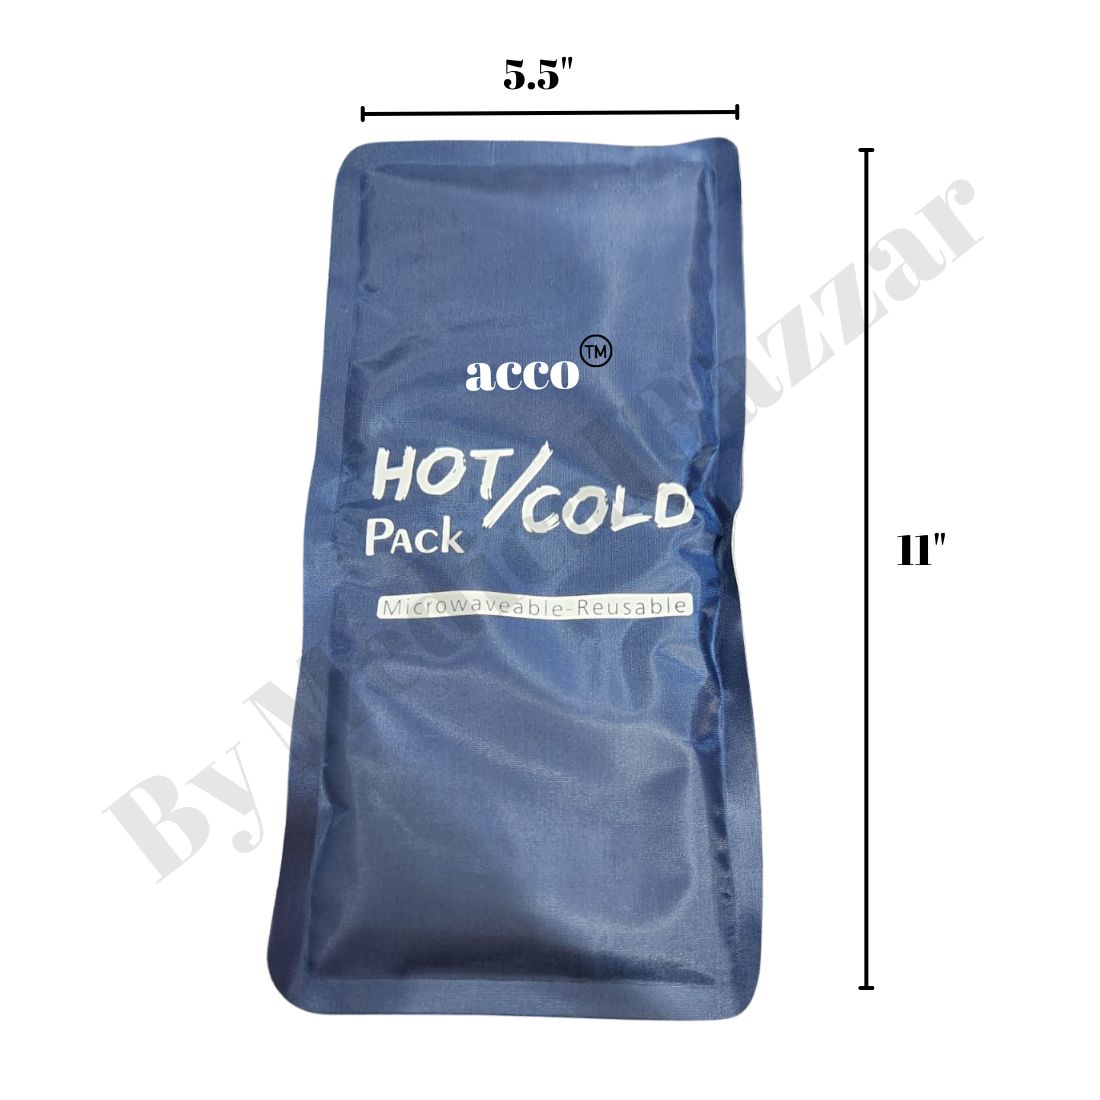 acco Hot & Cold Gel Pack (Microwaveable)